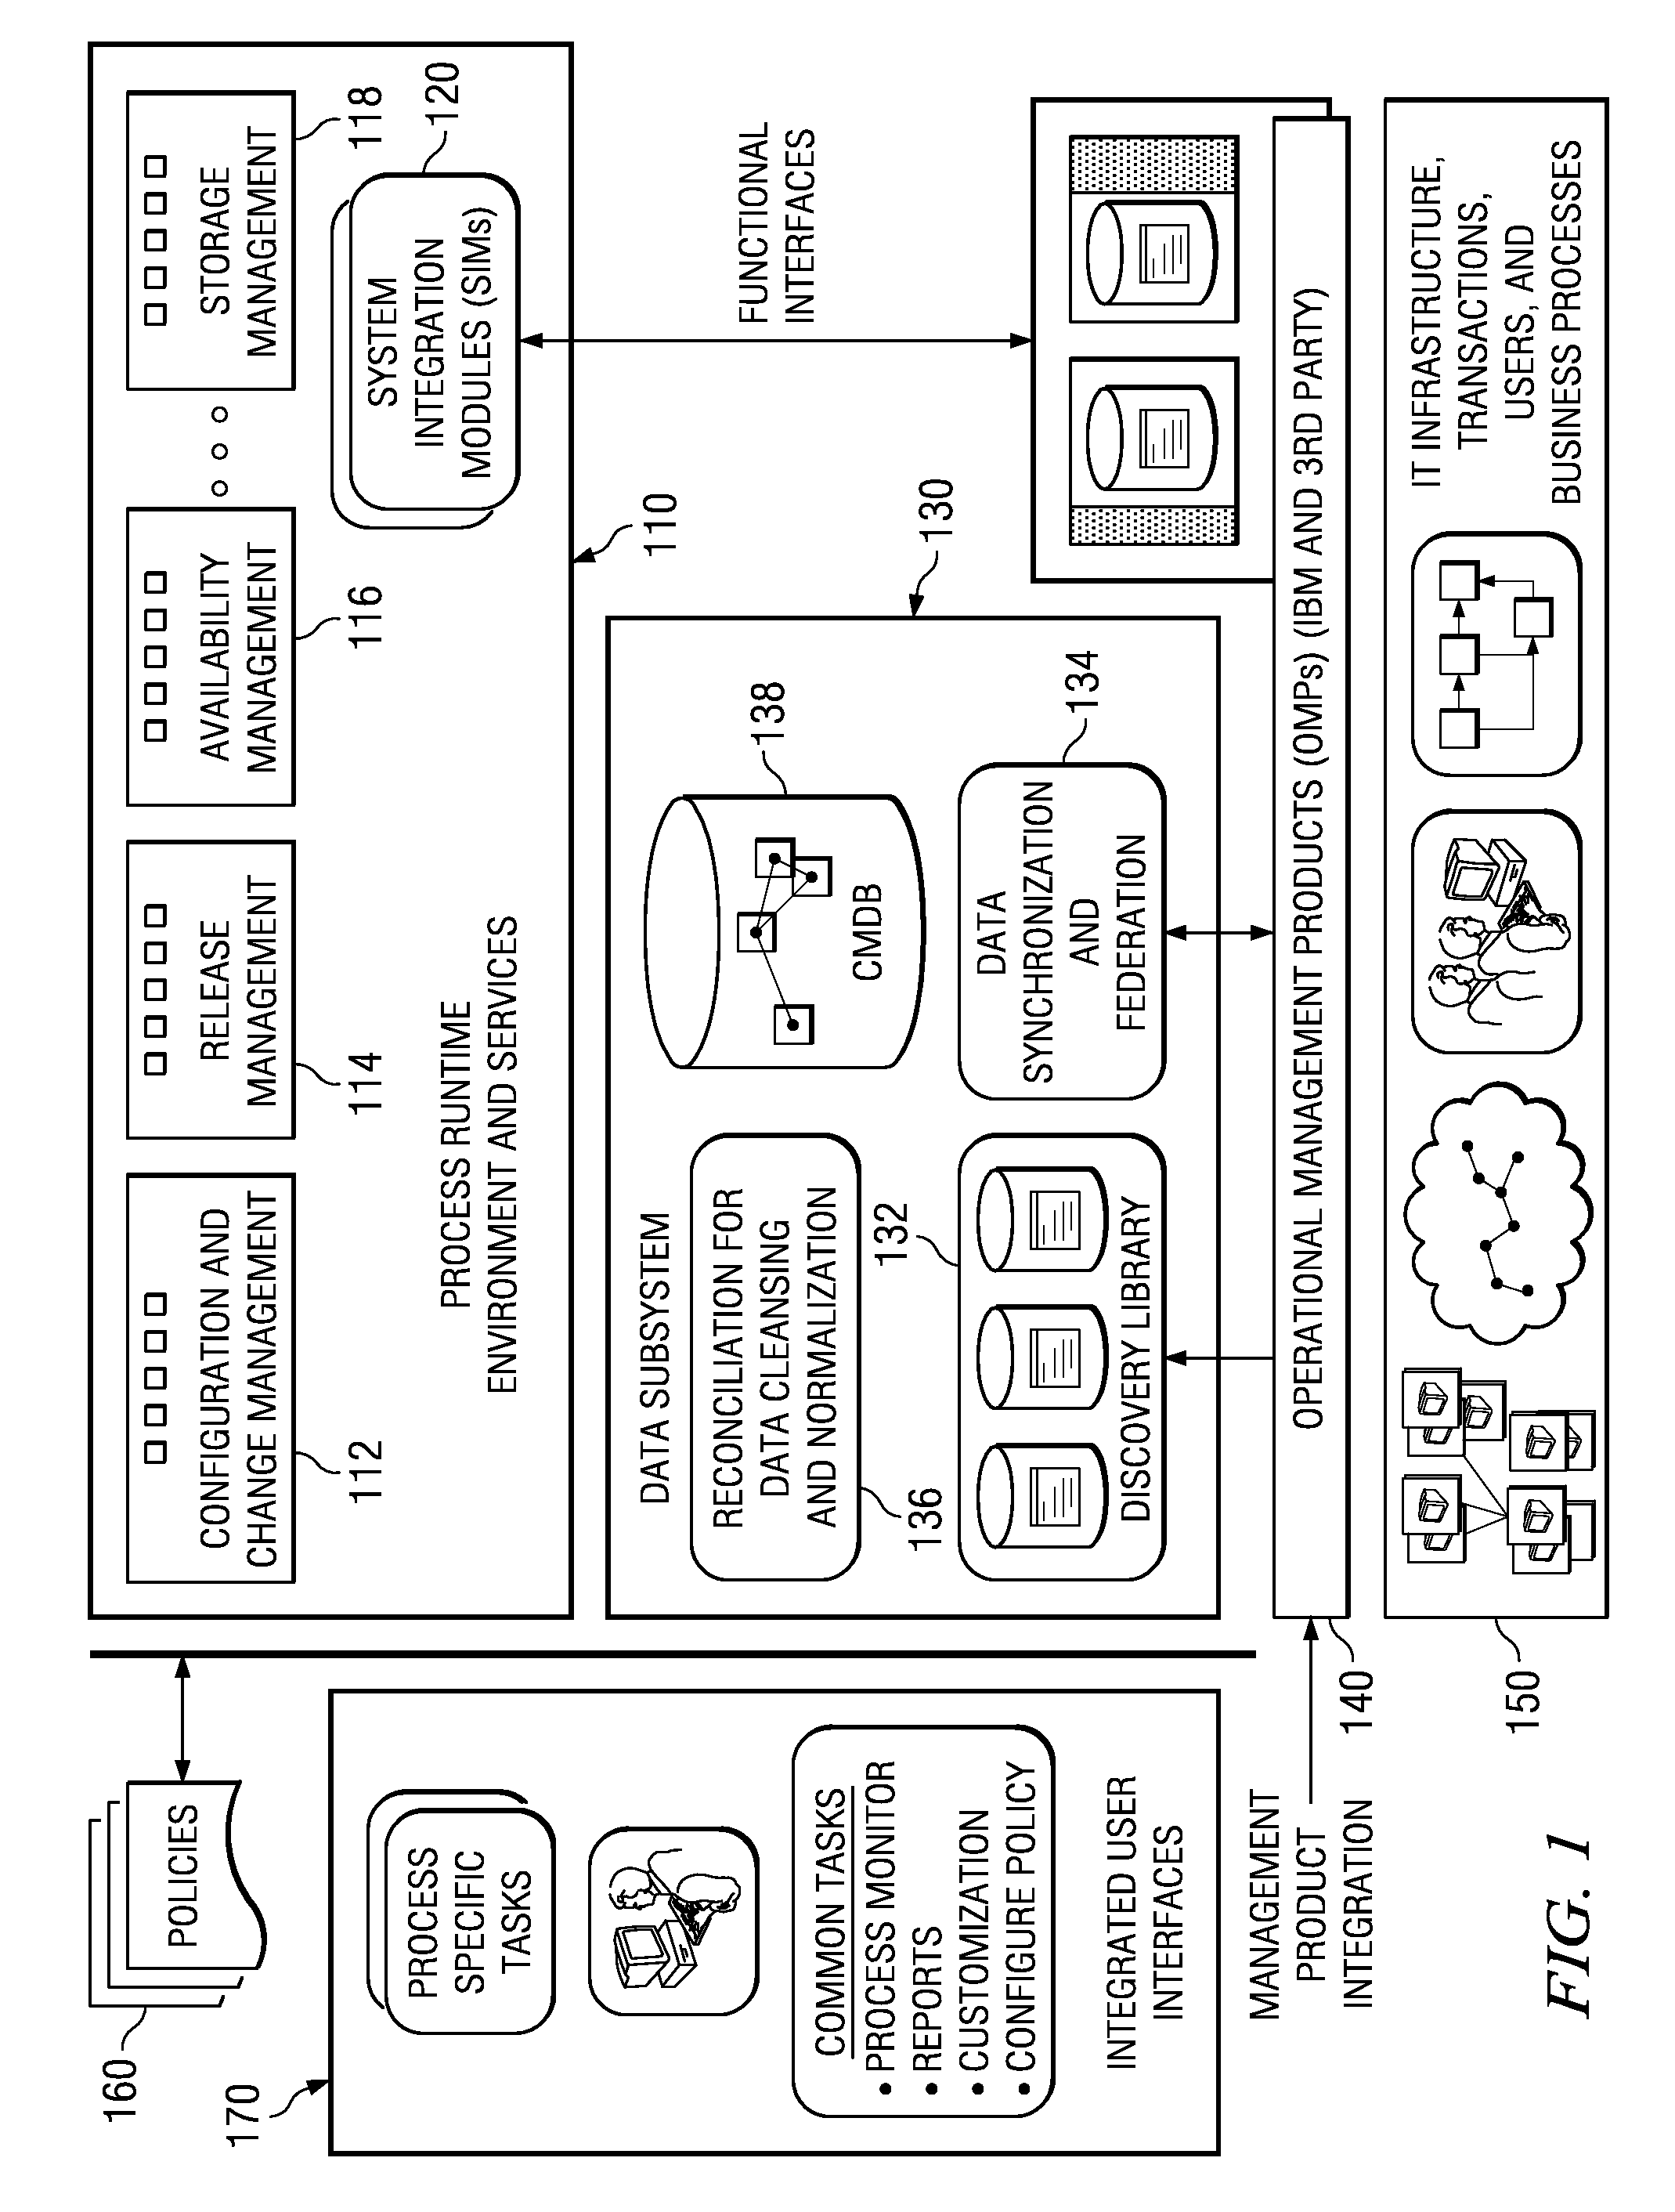 System and Method for Automatically Enforcing Change Control in Operations Performed by Operational Management Products